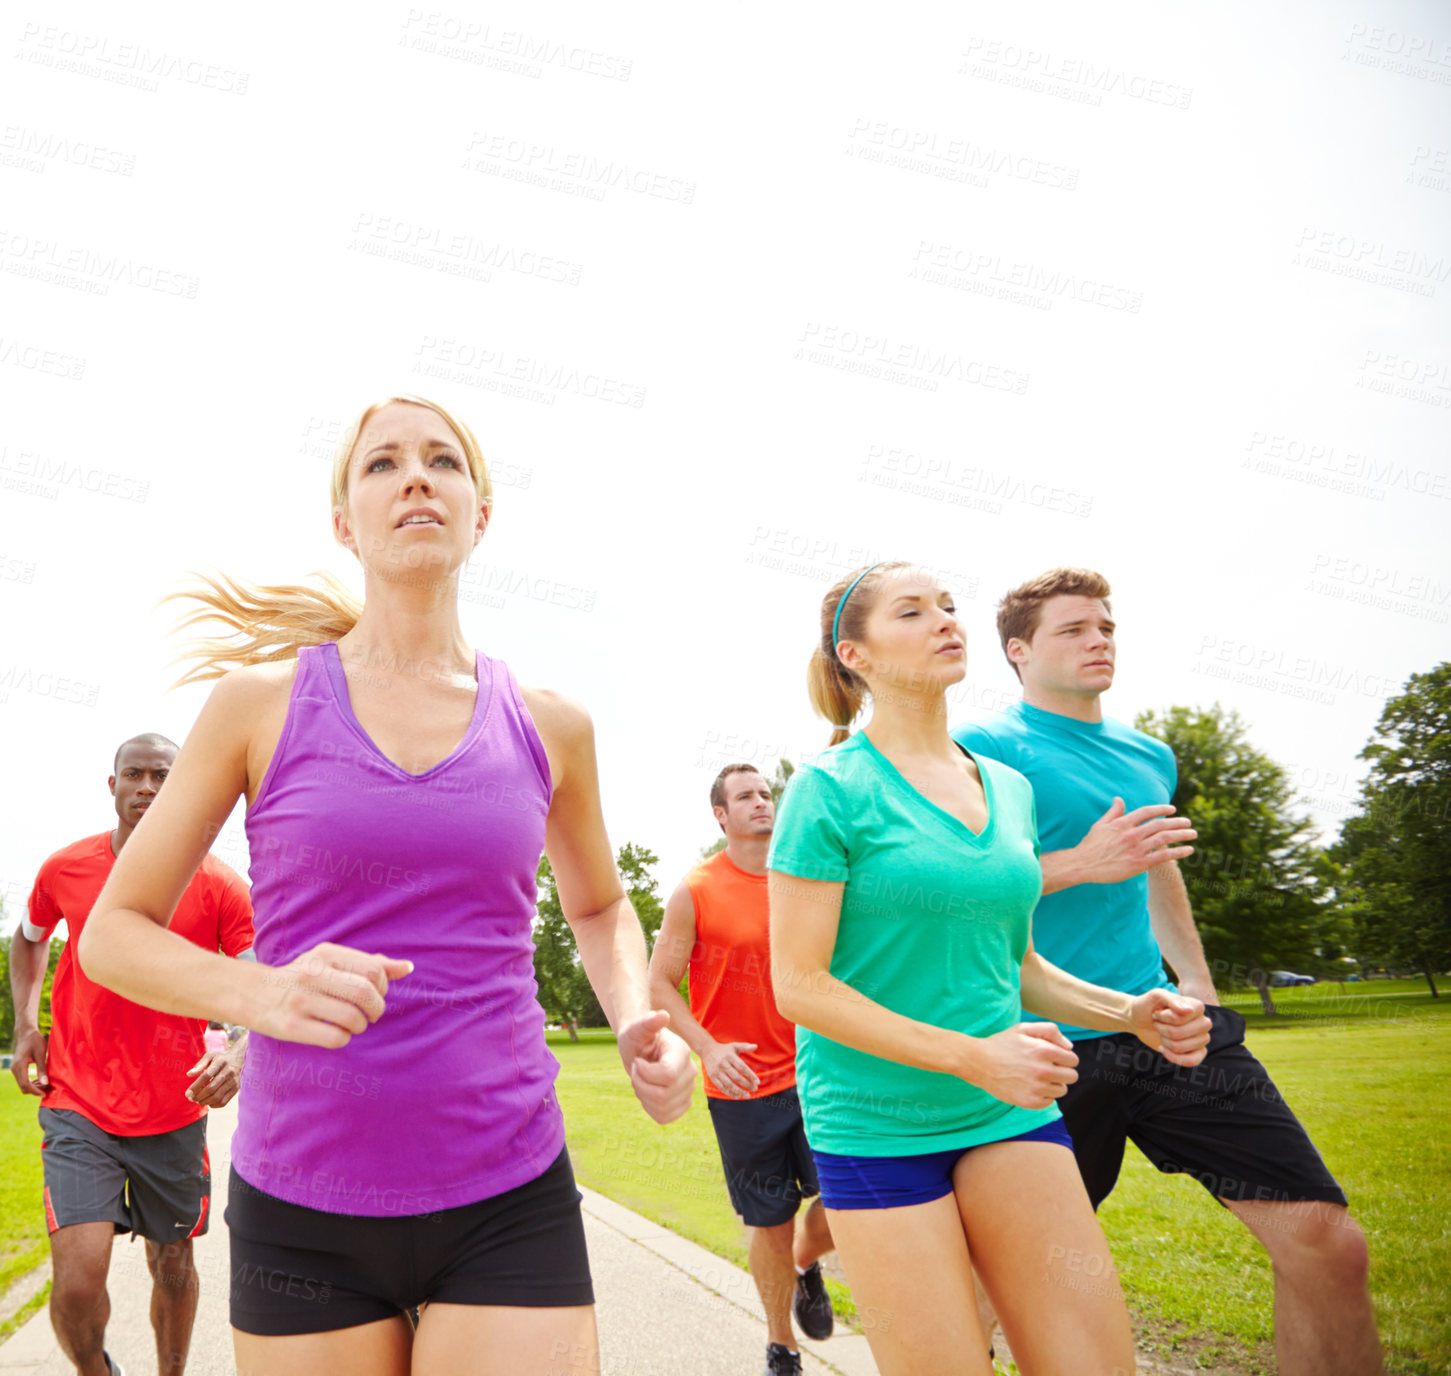 Buy stock photo Front view of a group of runners exercising outdoors